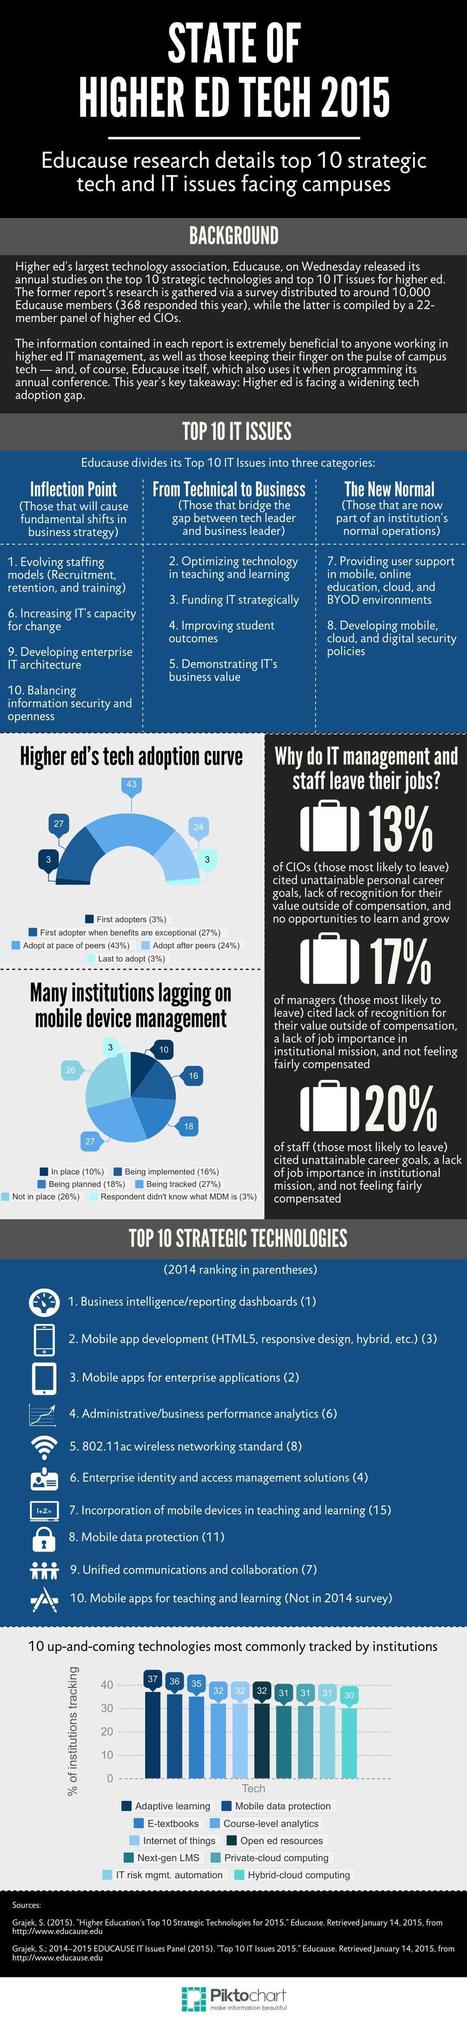 What you need to know about Educause's latest research [Infographic] | Information and digital literacy in education via the digital path | Scoop.it